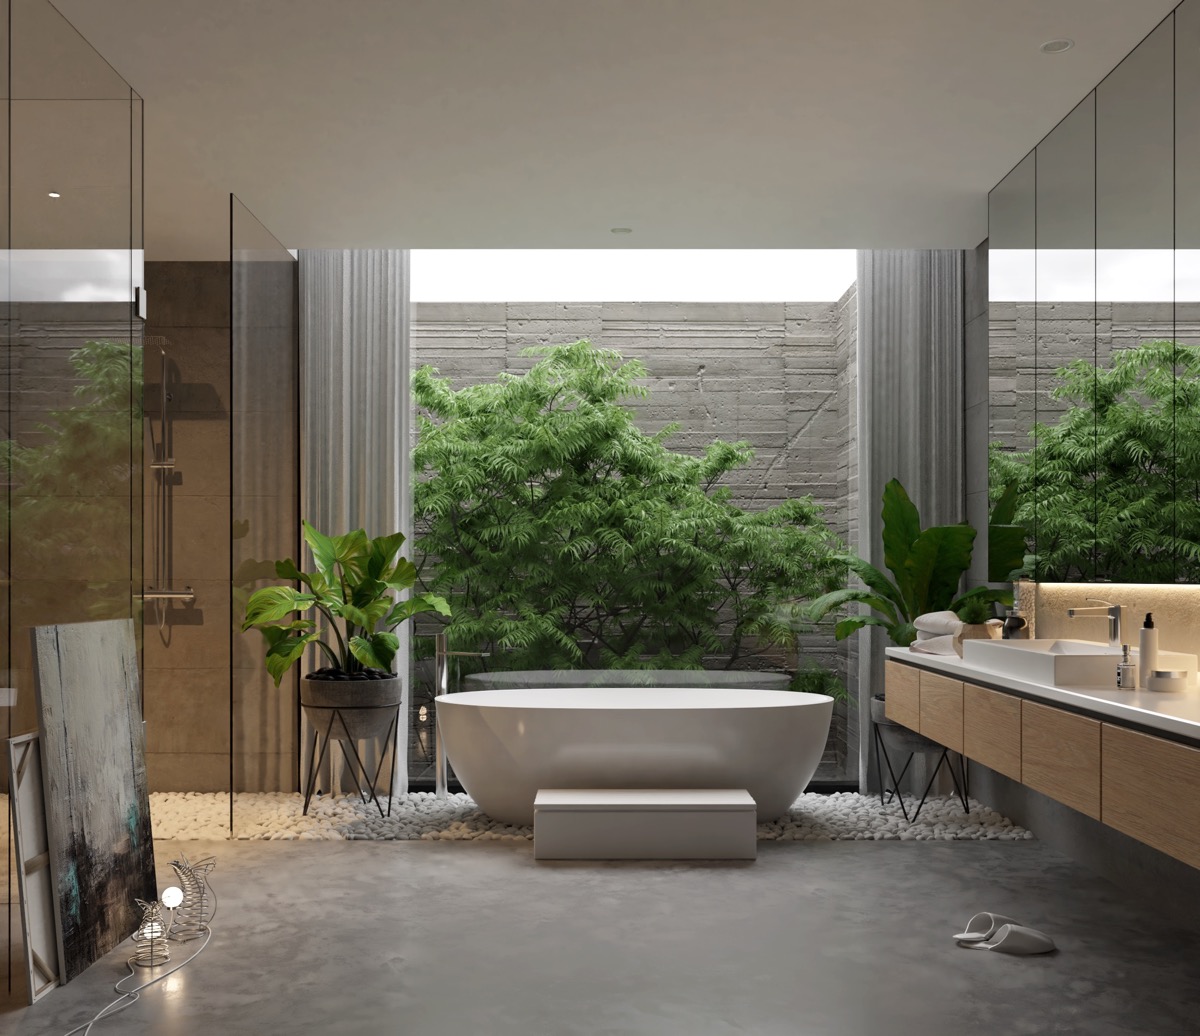 51 Master Bathrooms With Images, Tips,And Accessories To Help You 